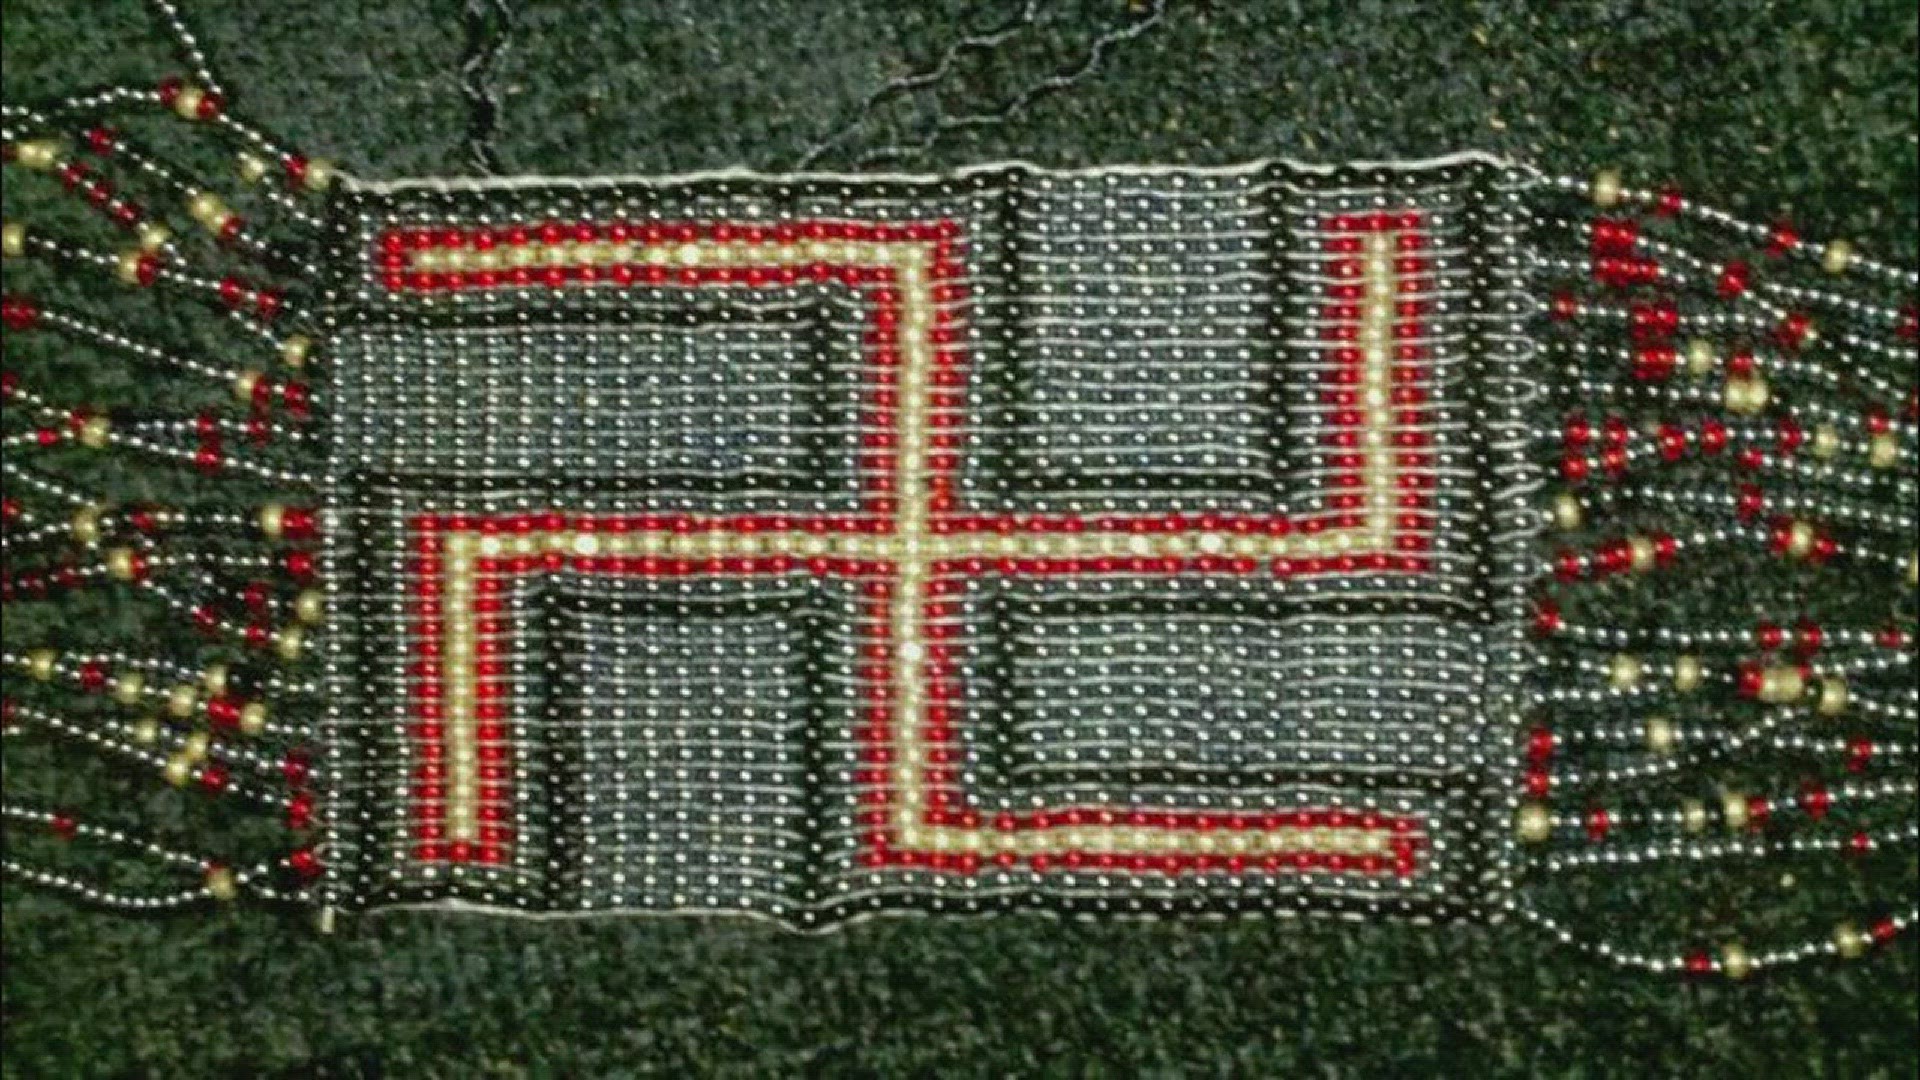 The swastika is a symbol of hate and evil, but for Native Americans, it's a cultural symbol of peace.